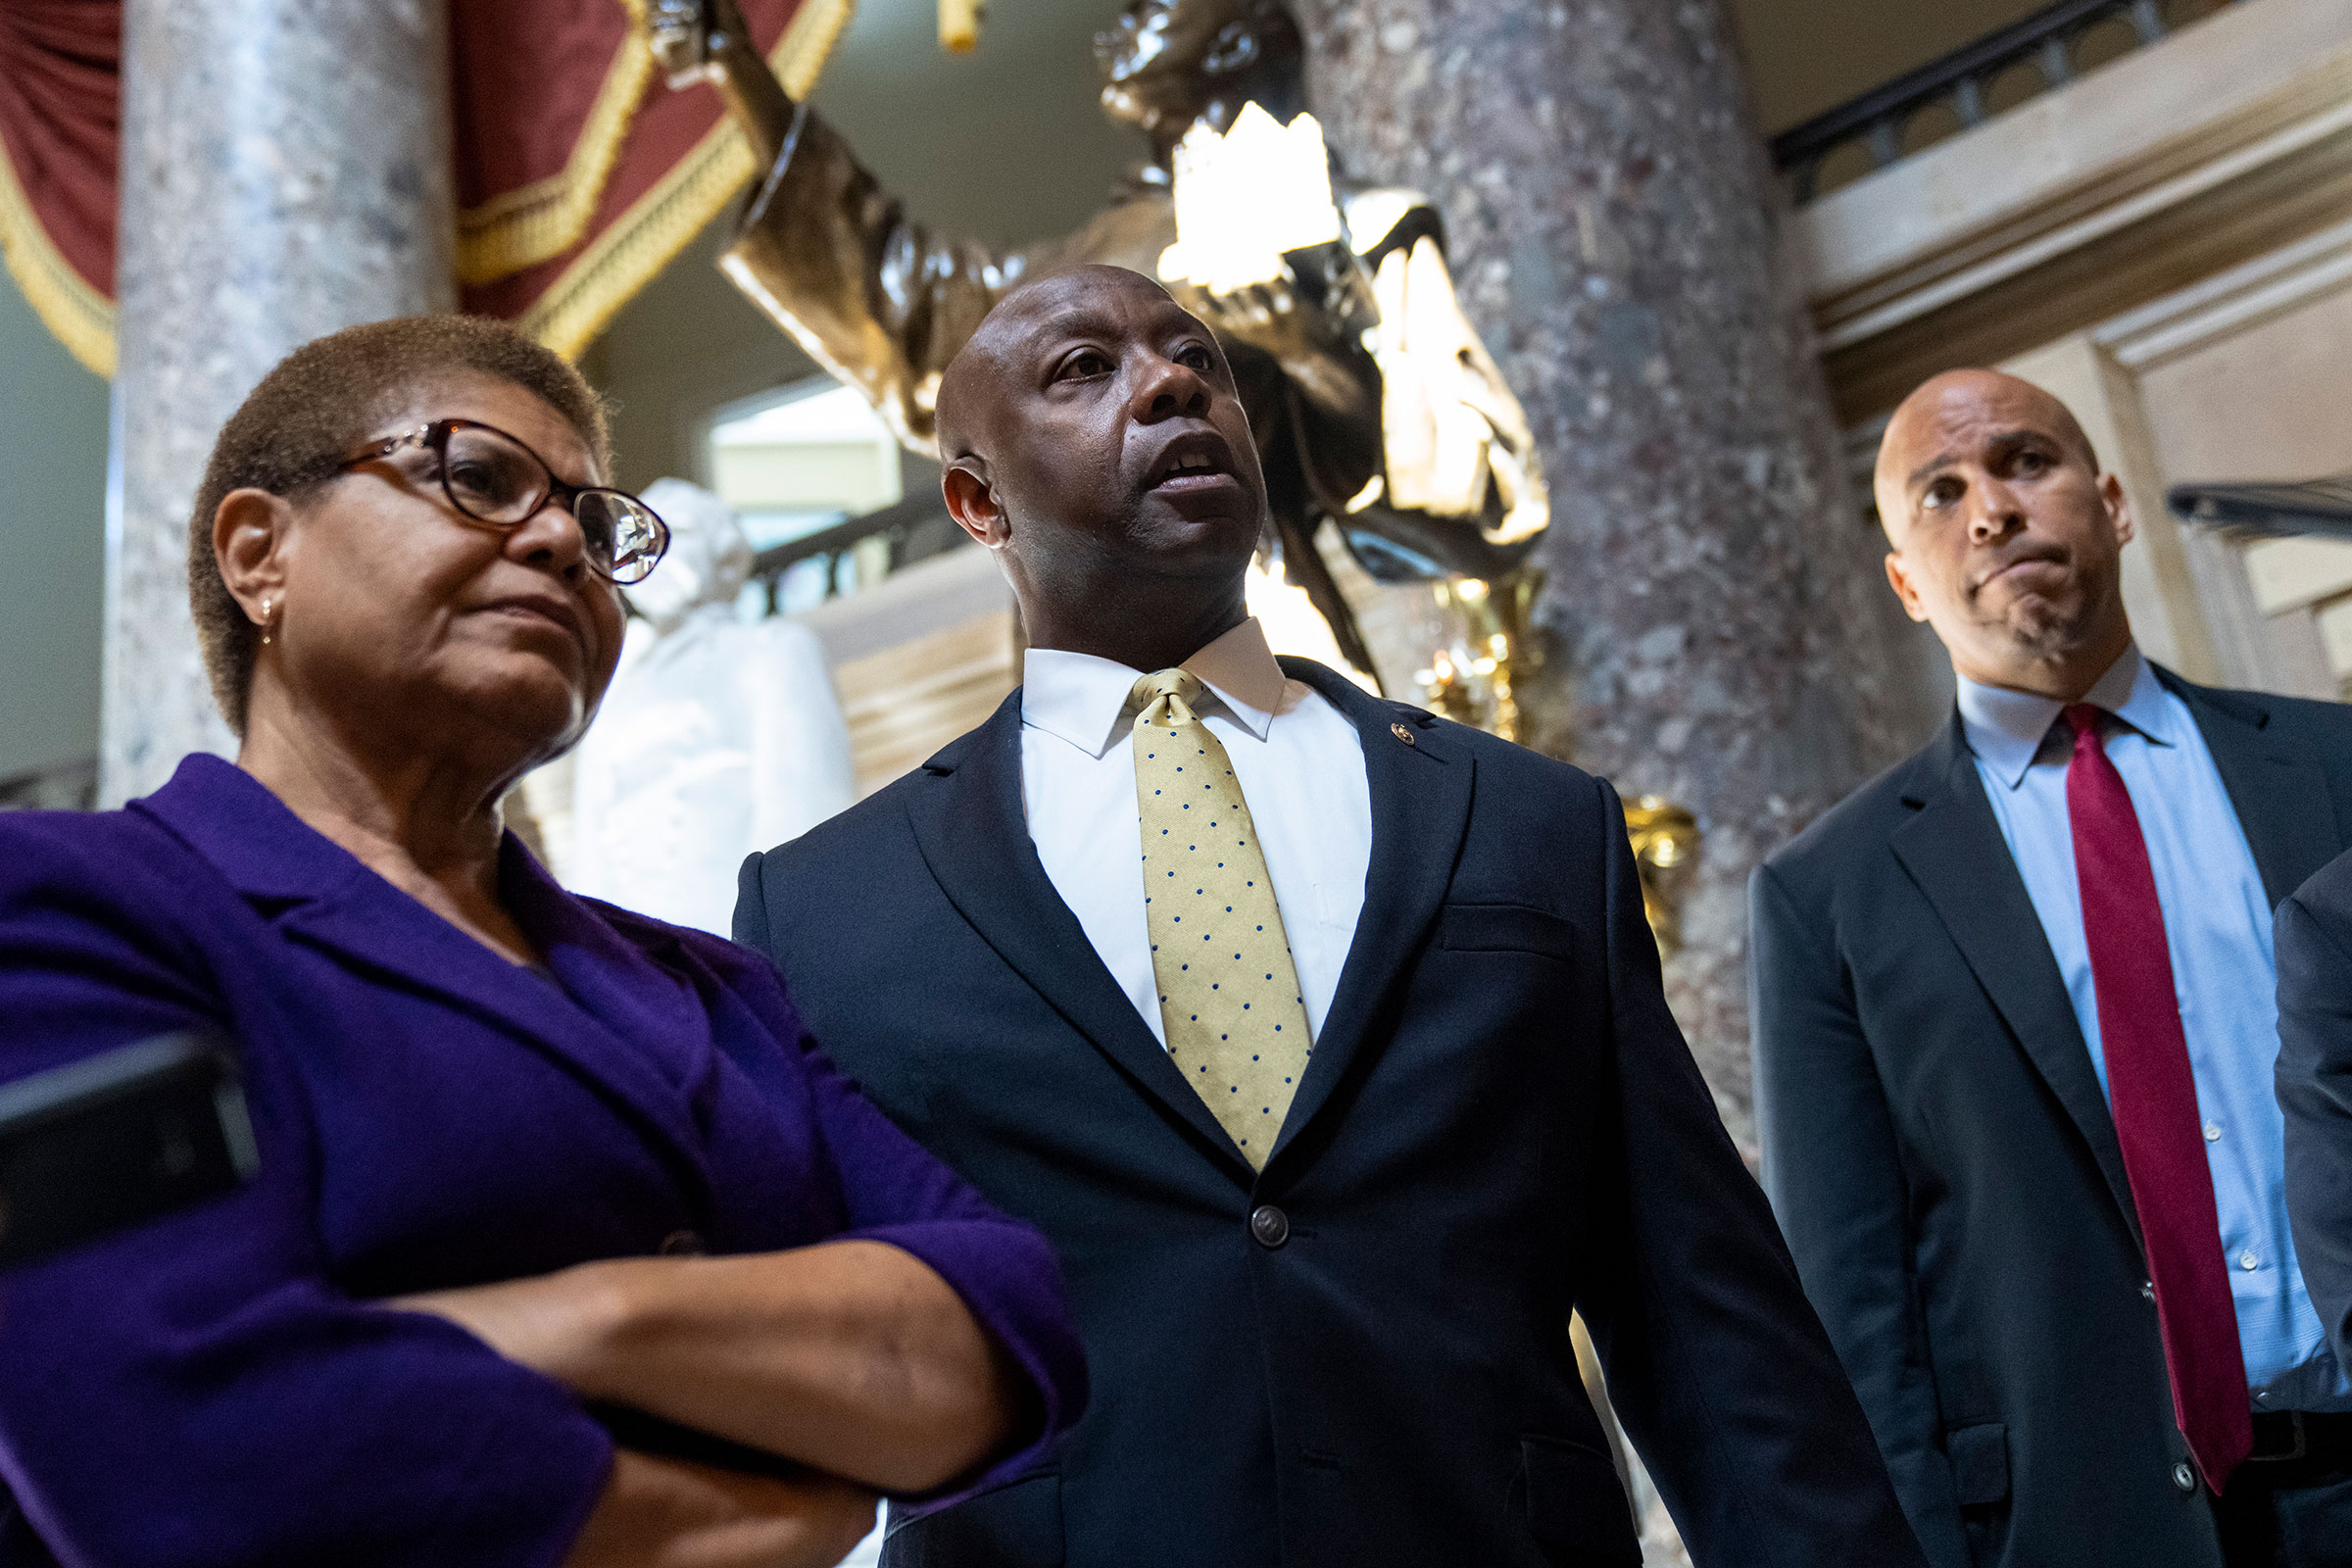 Rep. Karen Bass, Sen. Tim Scott, and Sen. Cory Booker speak briefly to reporters as they exit the office of Rep. James Clyburn following a meeting about police reform legislation on Capitol Hill on May 18, 2021.